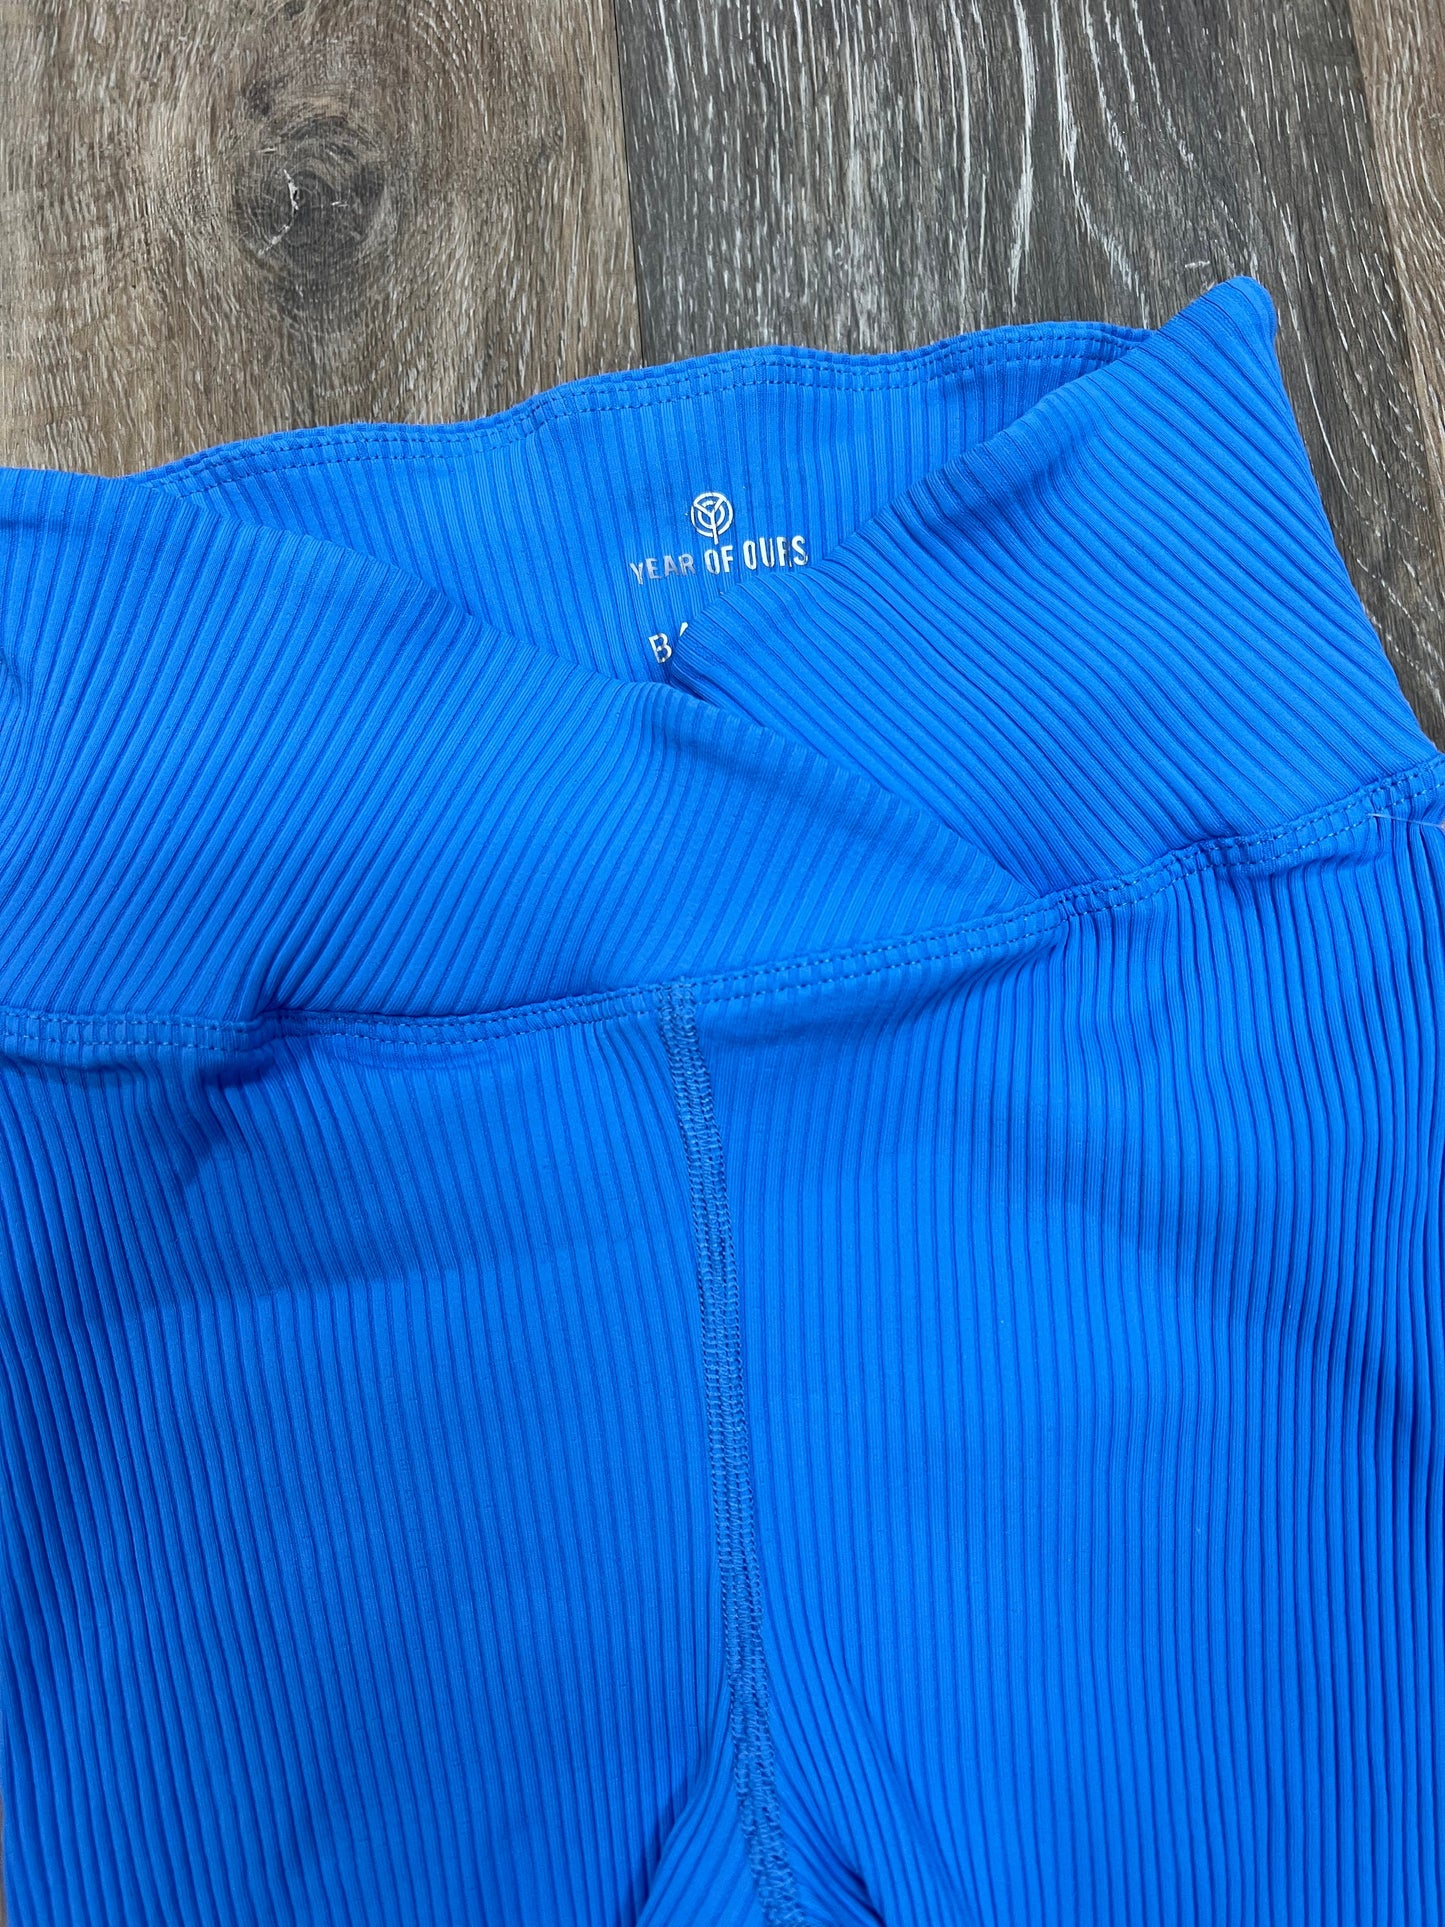 Blue Athletic Shorts Year Of Ours, Size S